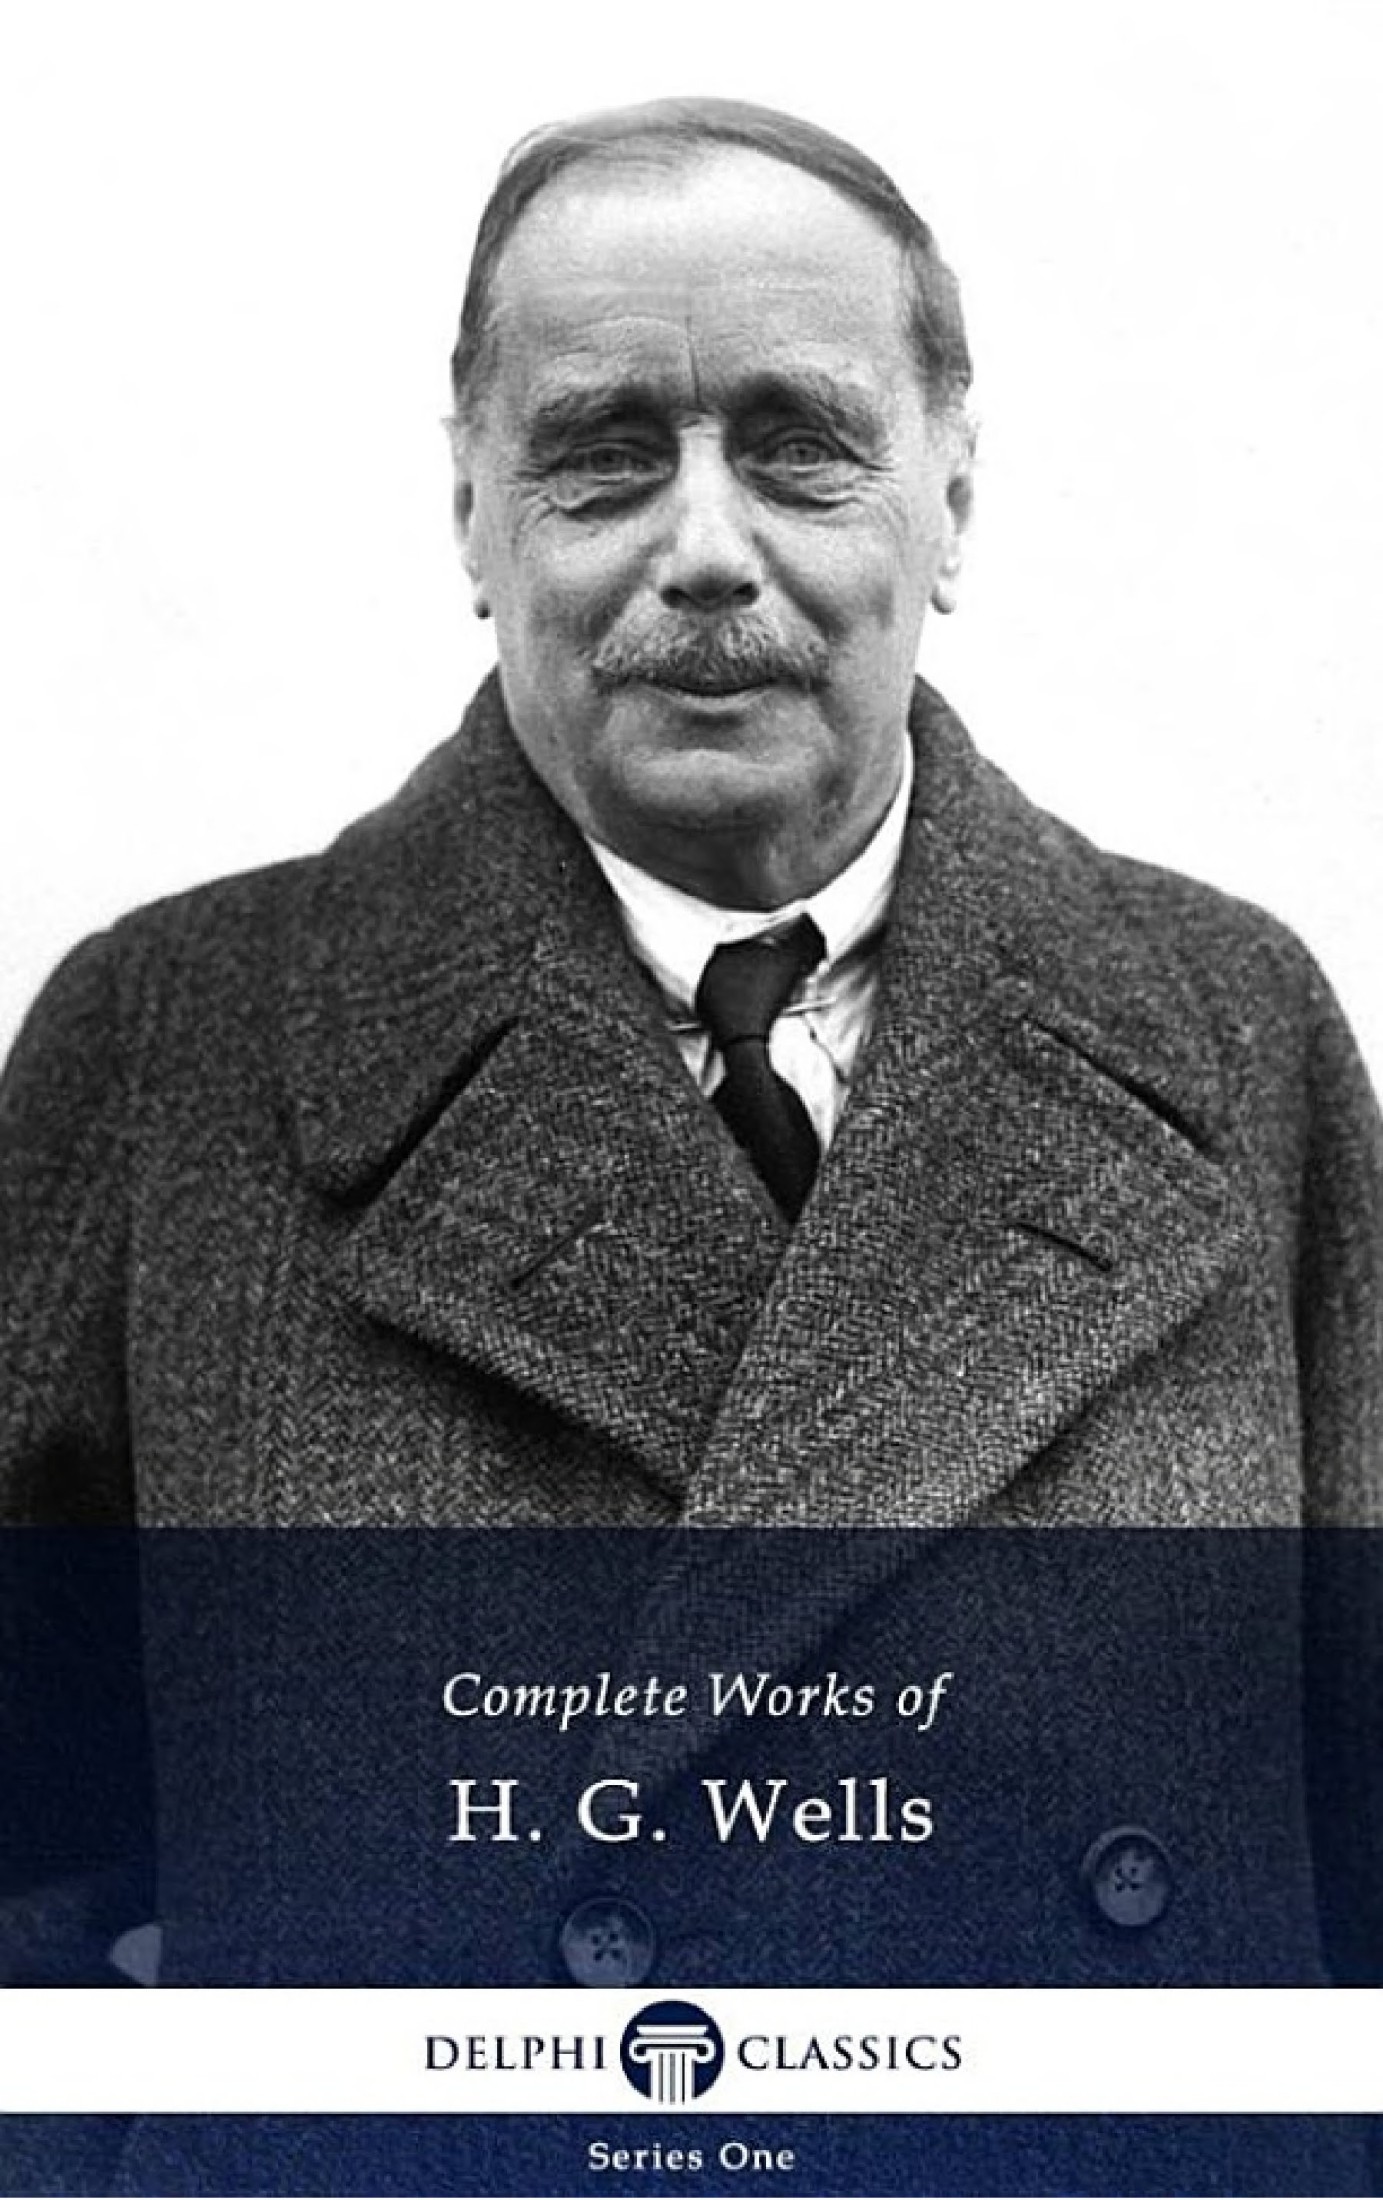 Complete Works of H. G. Wells